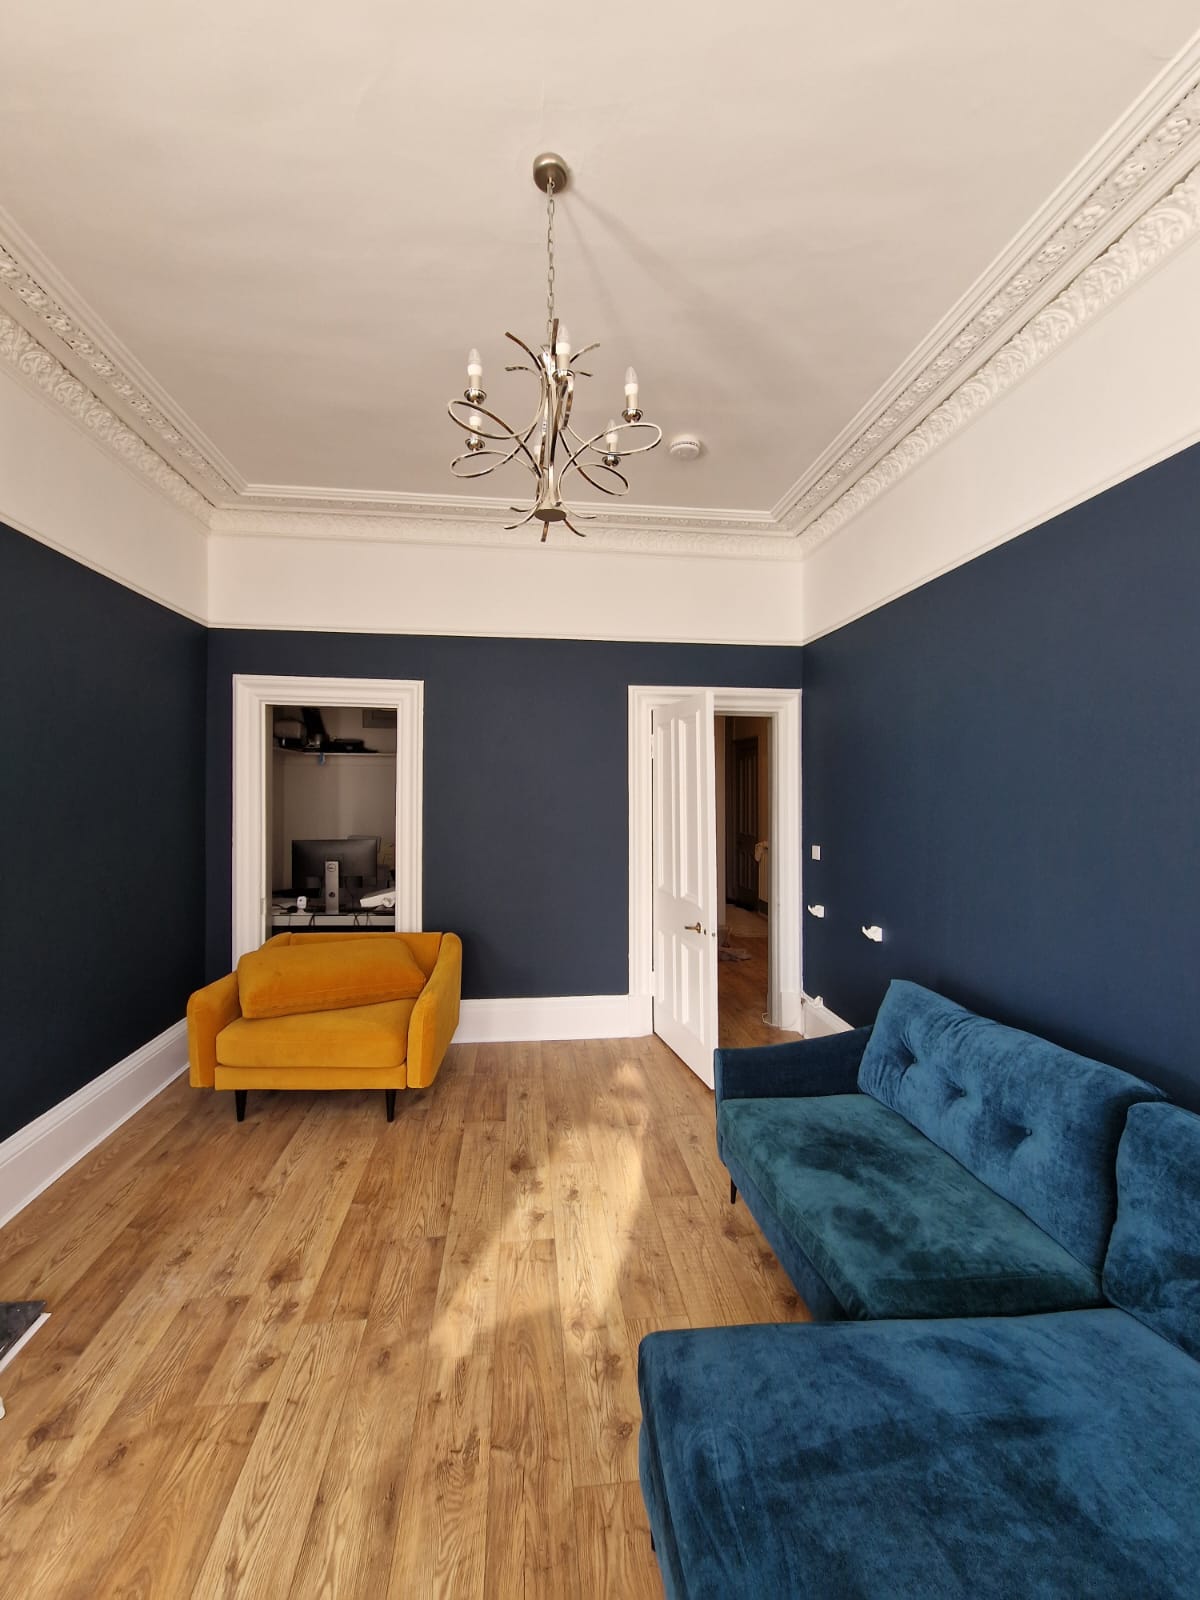 A picture of a flat in Edinburgh decorated by Painters and Decorators Edinburgh